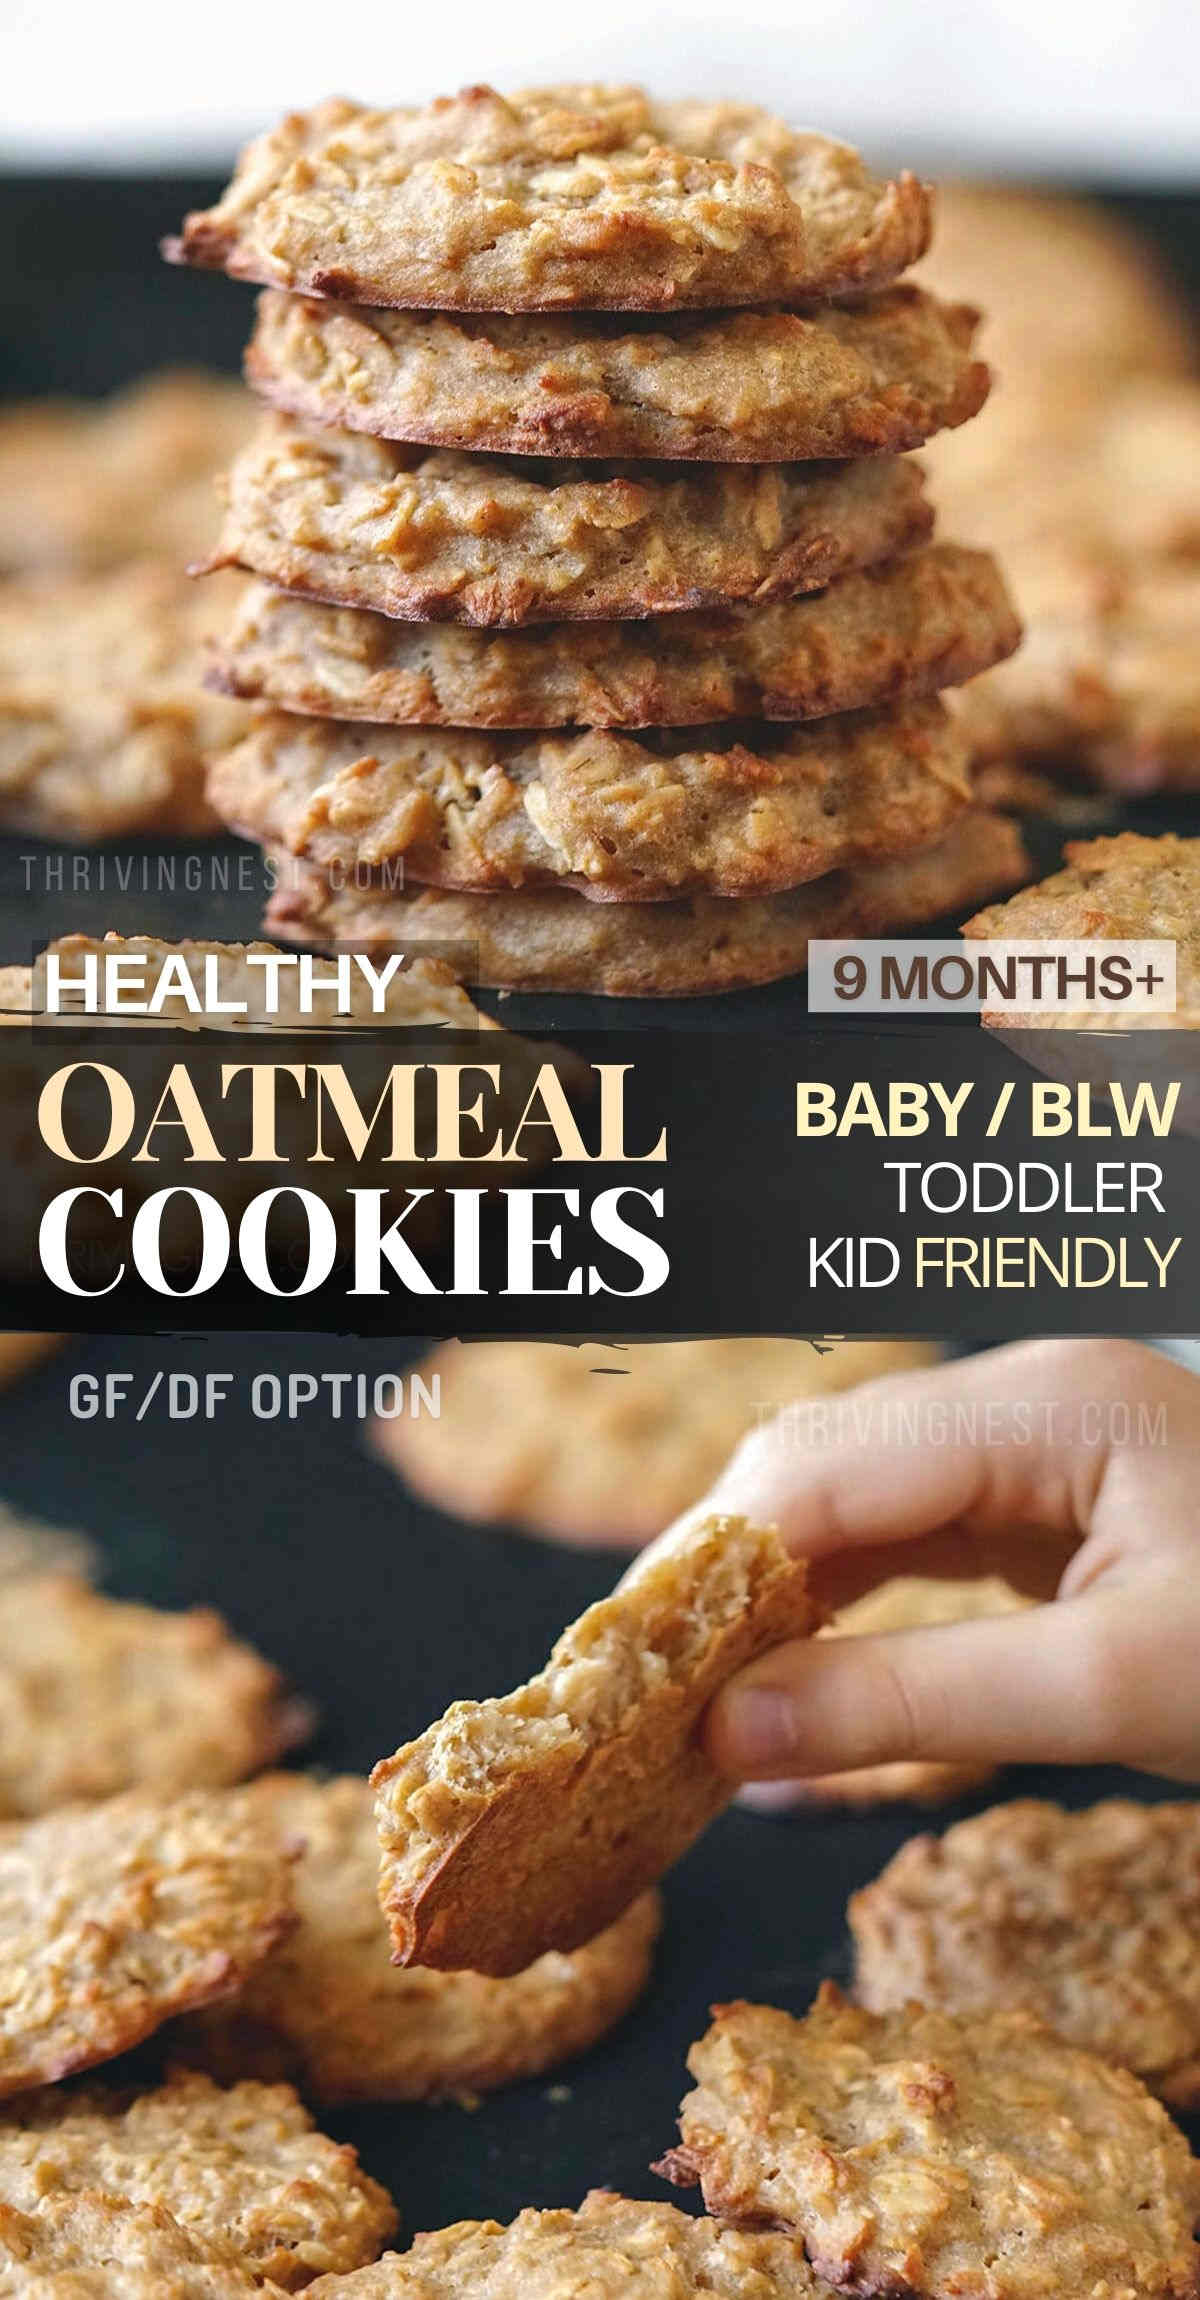 These Healthy Baby Oatmeal Cookies are soft, chewy, and full of nutritious ingredients. You can customize the recipe according to your baby's needs by using different purees, such as apple sauce, banana, or other favorite purees. Serve these cookies as a snack or breakfast, and pack them in small lunch boxes for older kids. Great for baby led weaning too! #blw #cookies #baby #toddler #kids #recipe